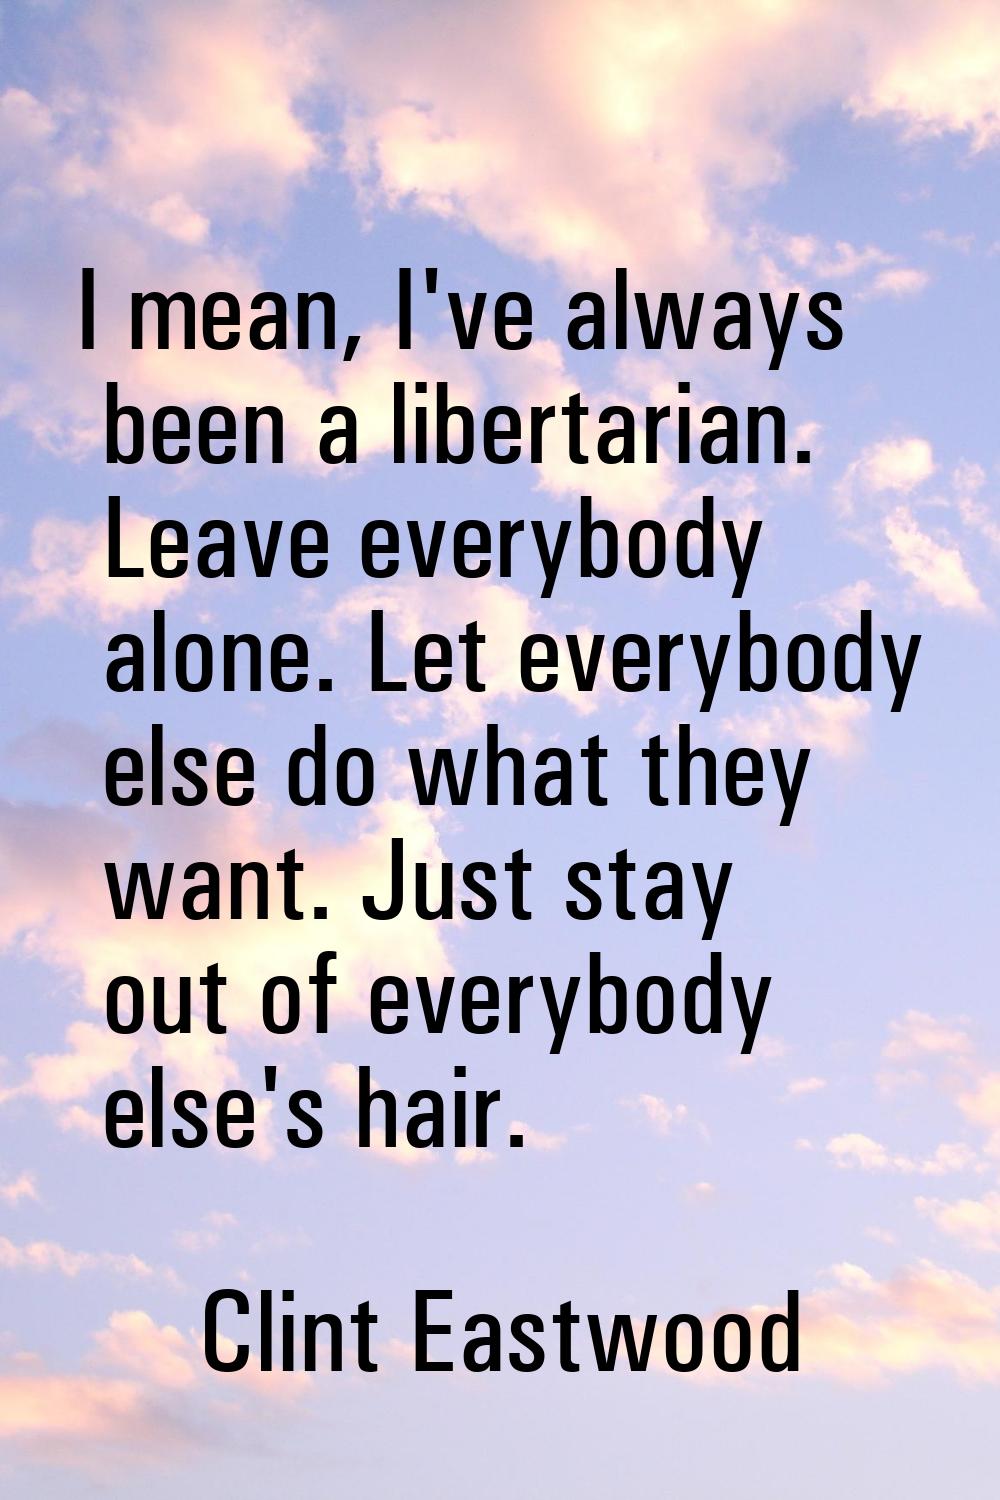 I mean, I've always been a libertarian. Leave everybody alone. Let everybody else do what they want